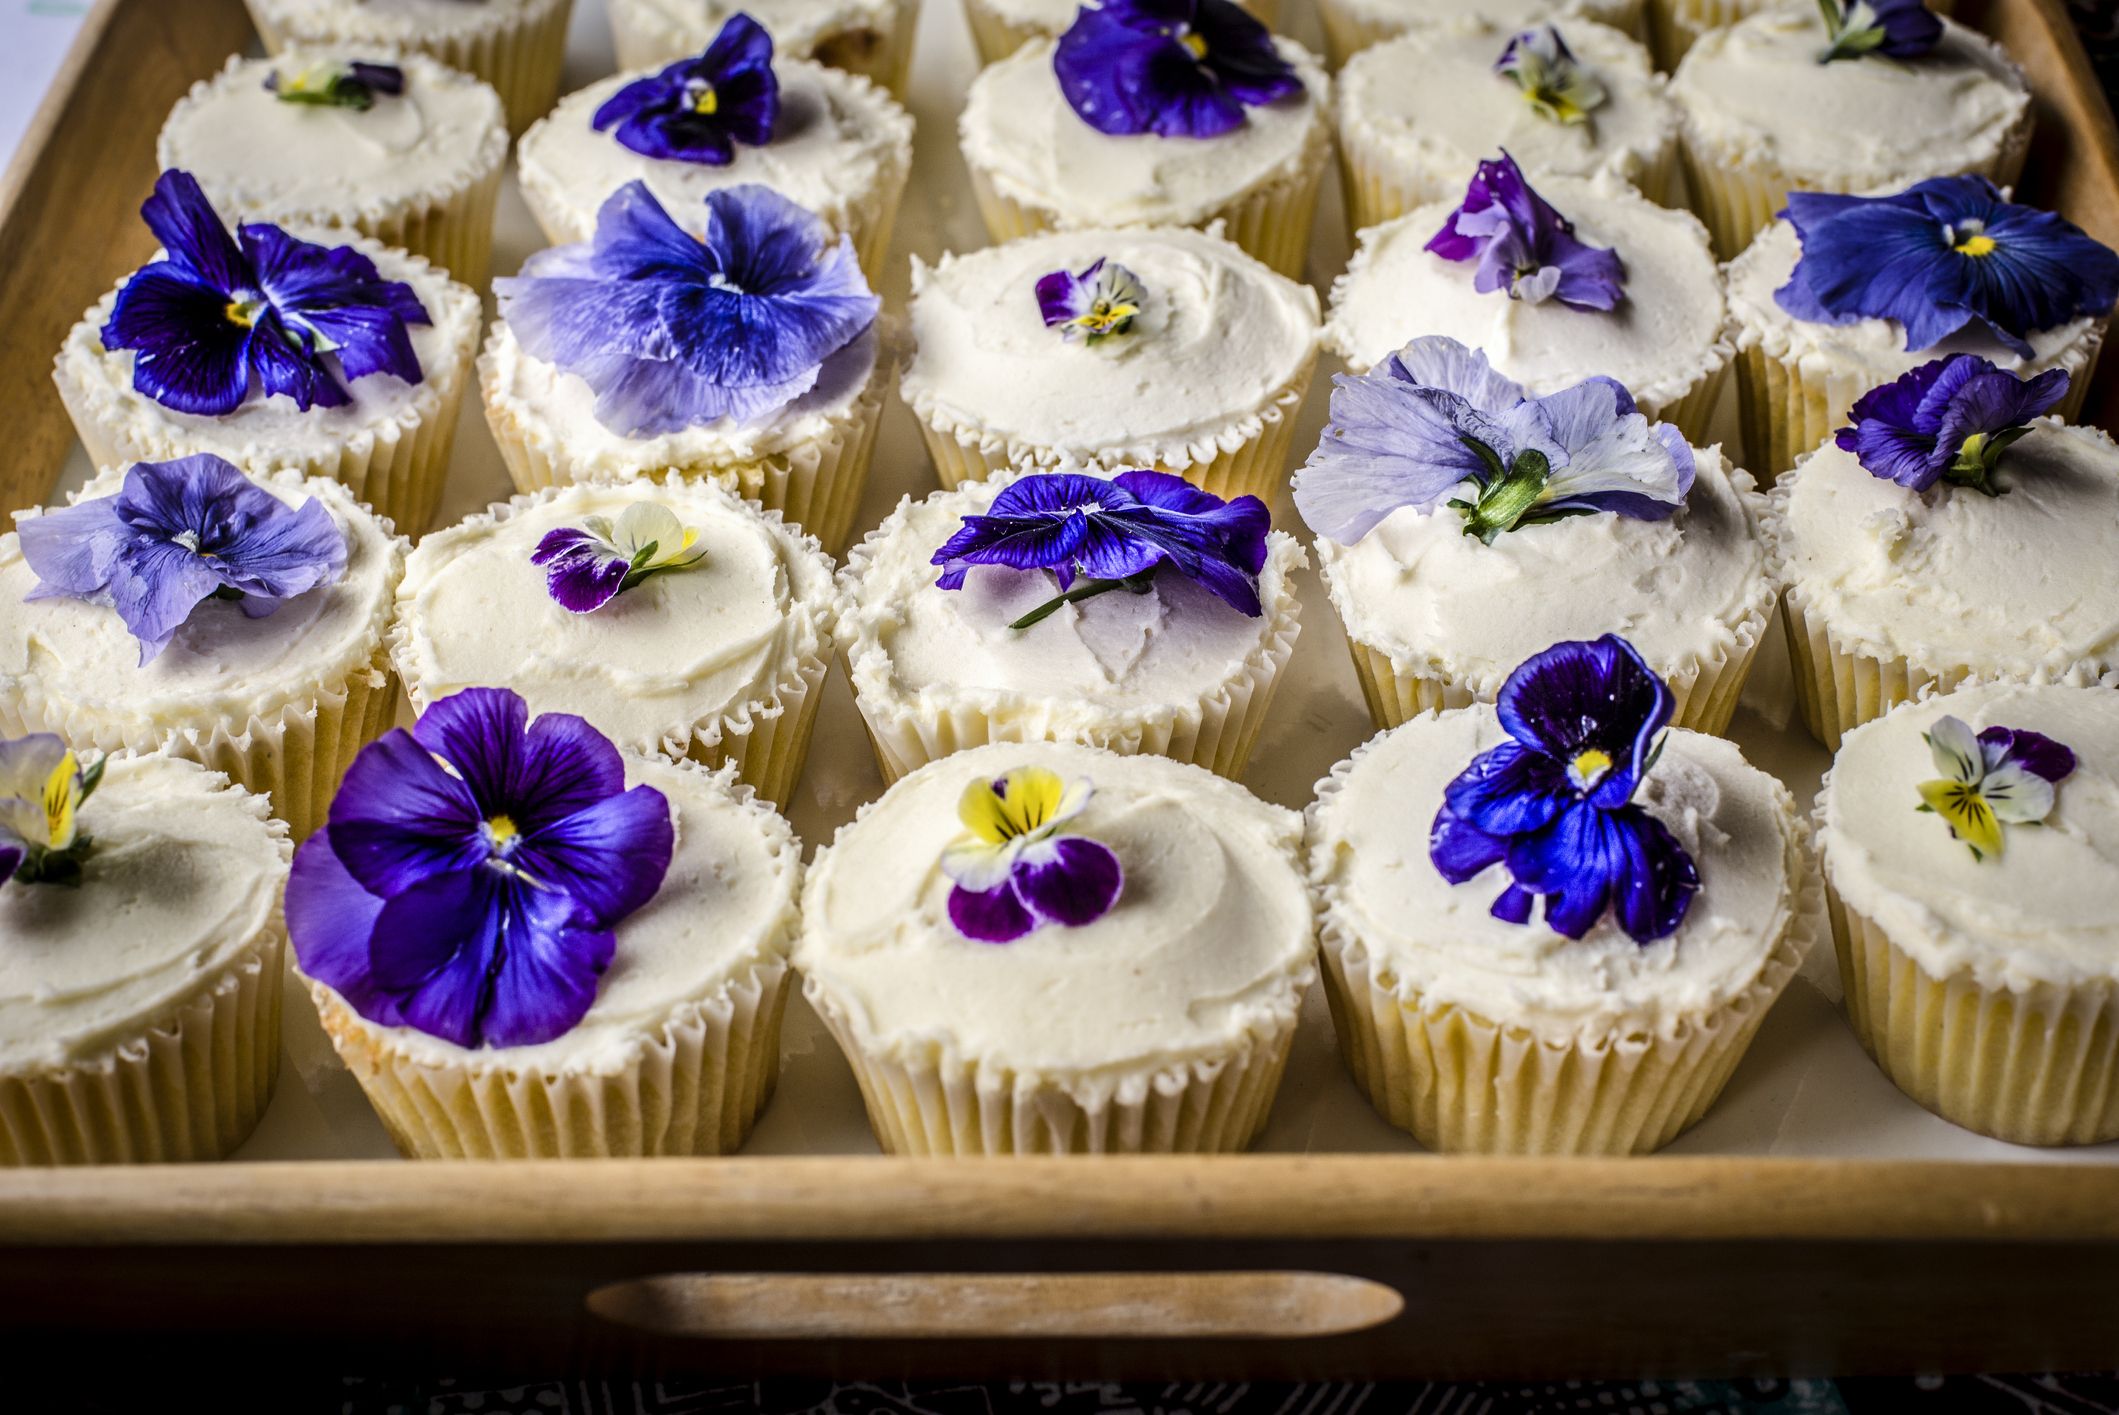 10 Incredible Edible Flowers for Dressing Up Cakes and Desserts